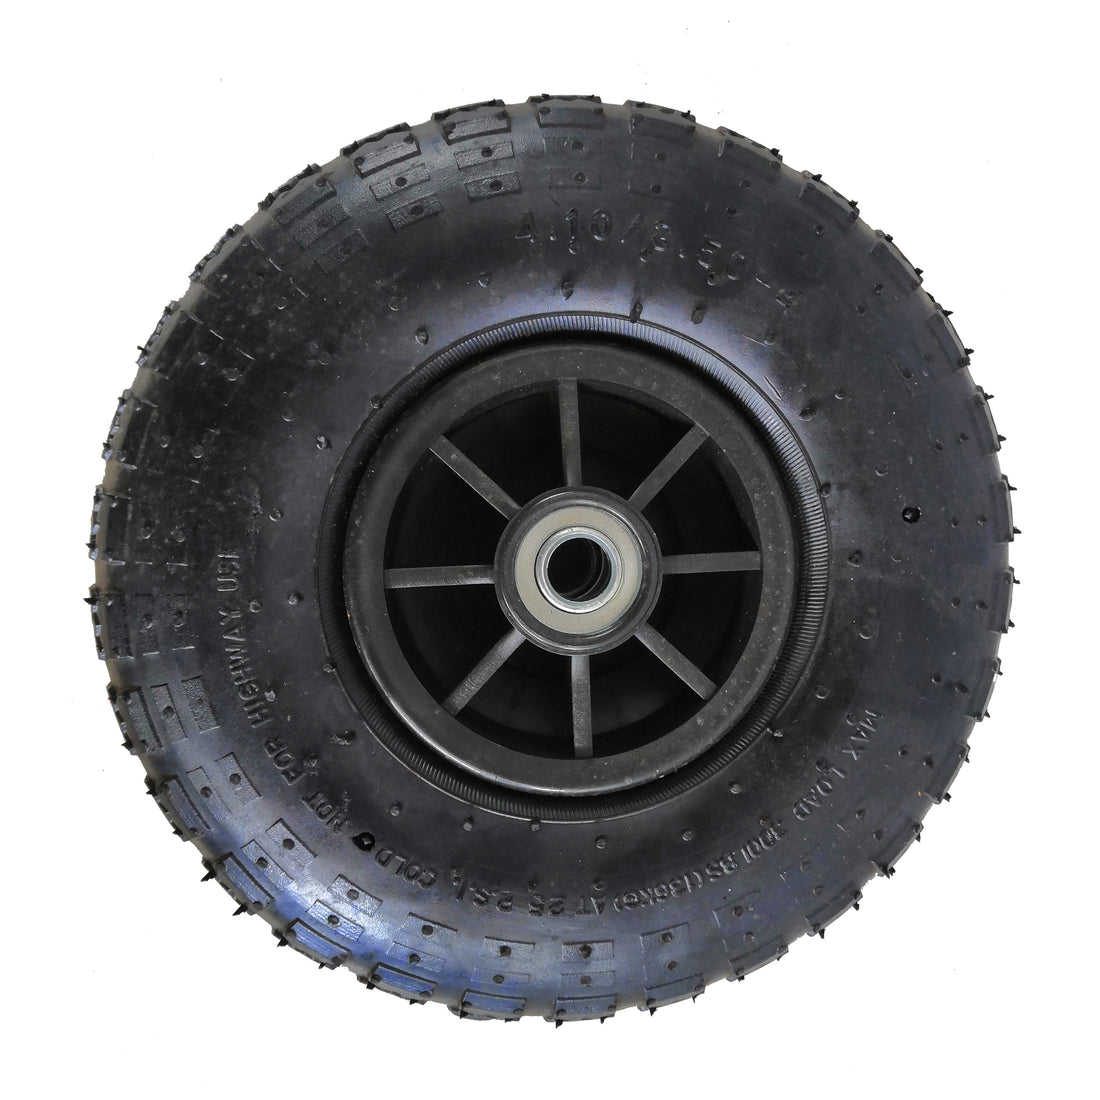 tires and inner tubes are made of heavy duty